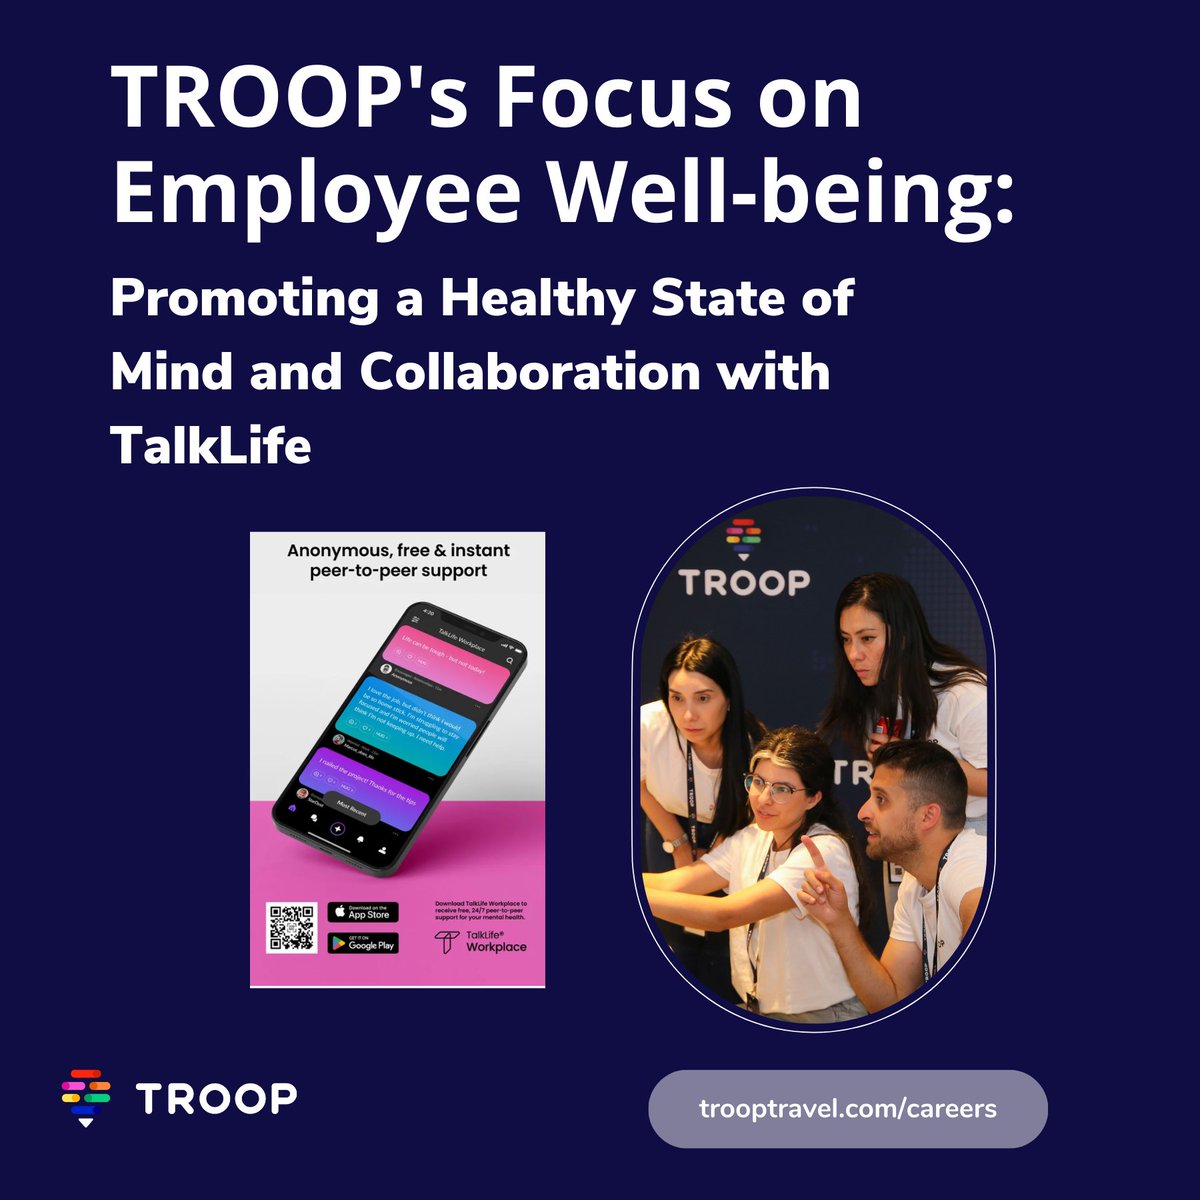 In an interview, TROOP redefines #MentalHealth as 'Healthy State of Mind.' Ubuntu, flexibility & feedback are core to their work culture, with sharing personal wellness tips in bi-weekly meetings! They're partnering with TalkLife to support employees. #workplacewellness